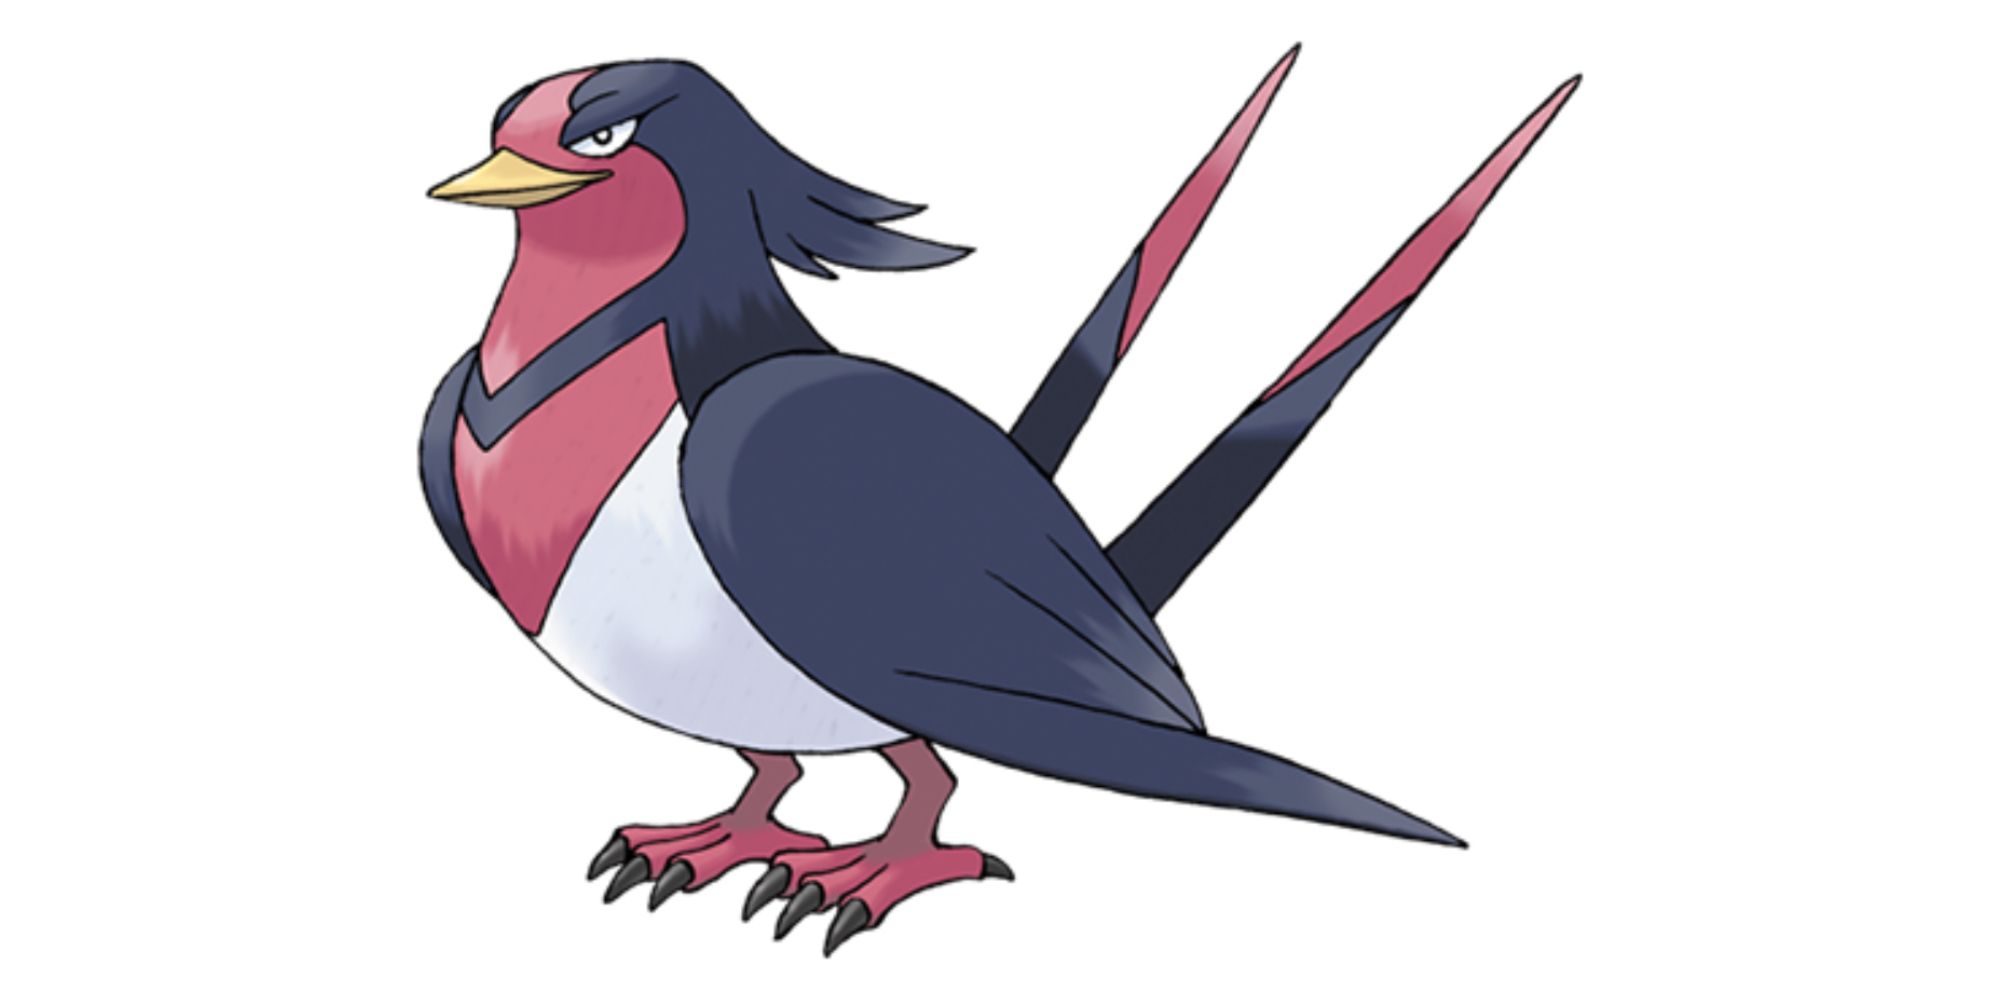 Hardest Pokémon to find in Pokémon GO - Swellow - Flying-type Pokémon that can use its claws and wings to attack Pokémon